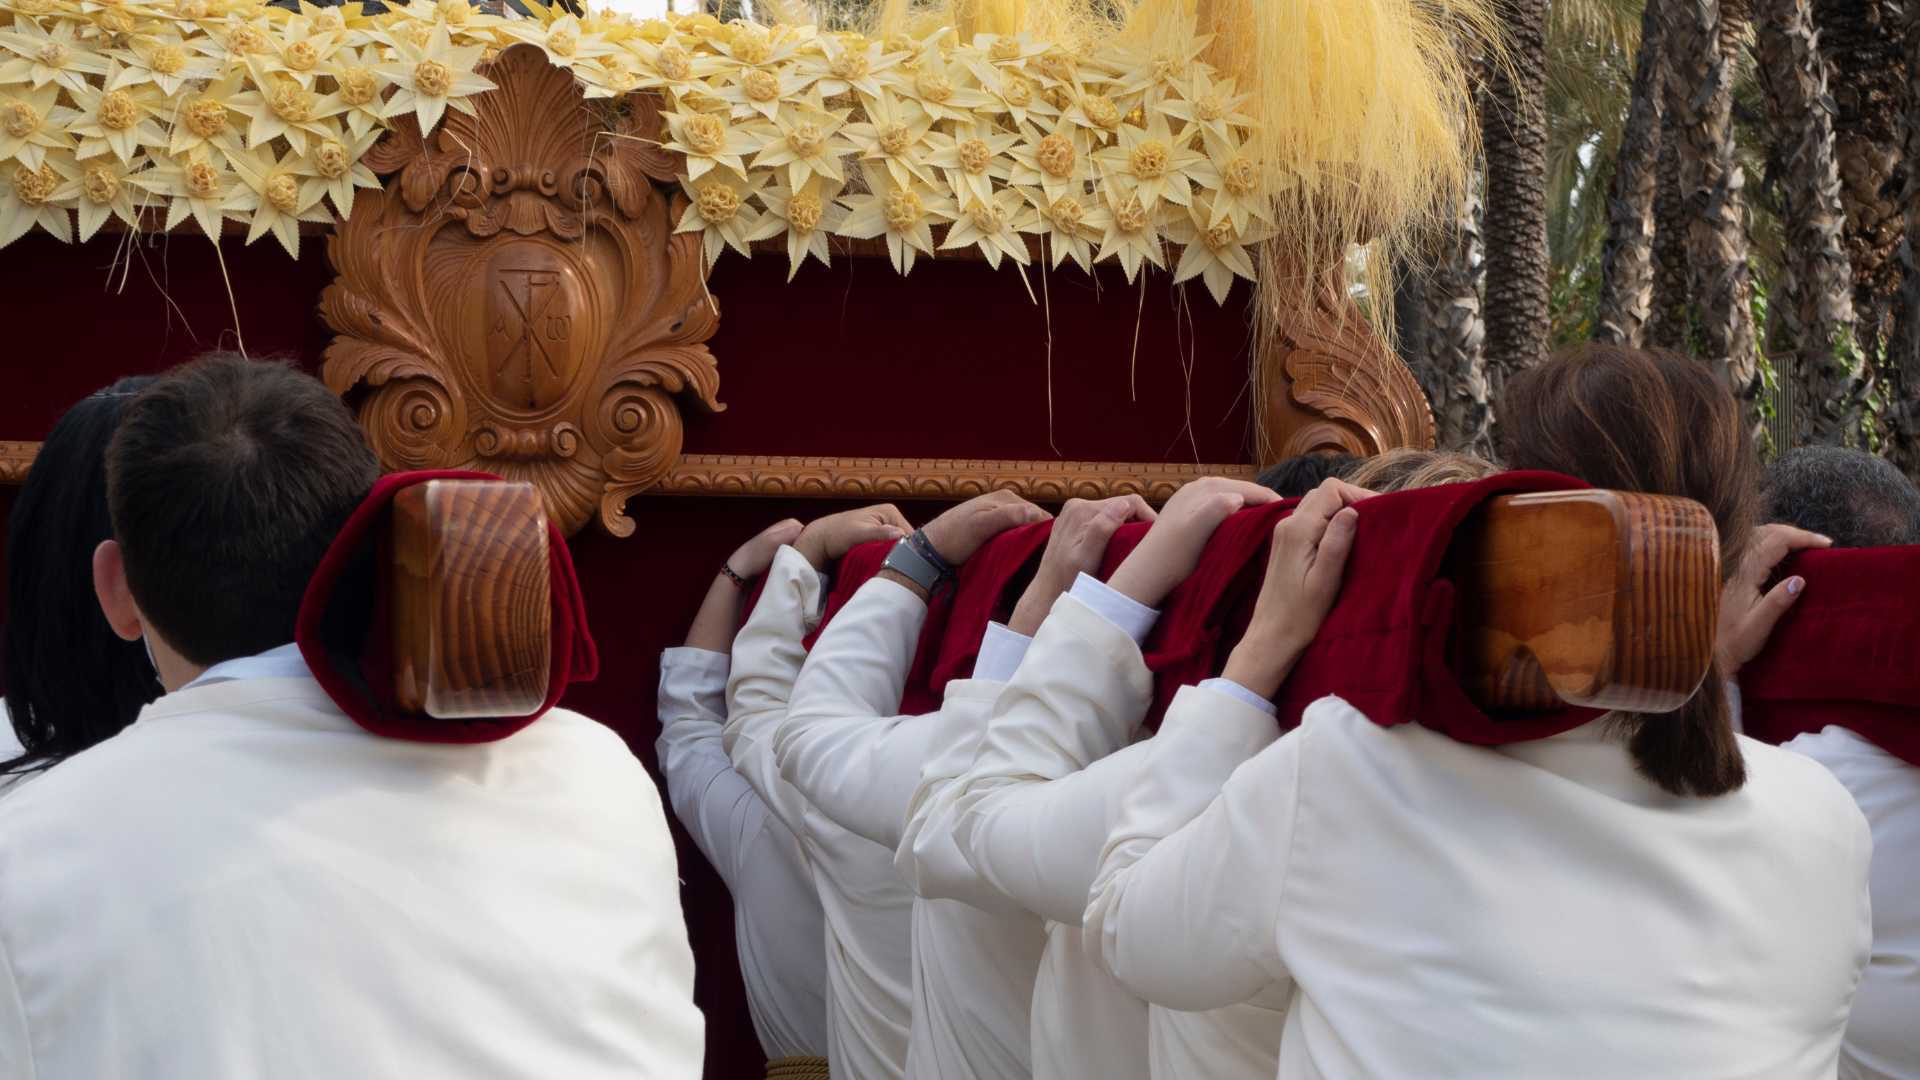 holy week traditions in the region of valencia